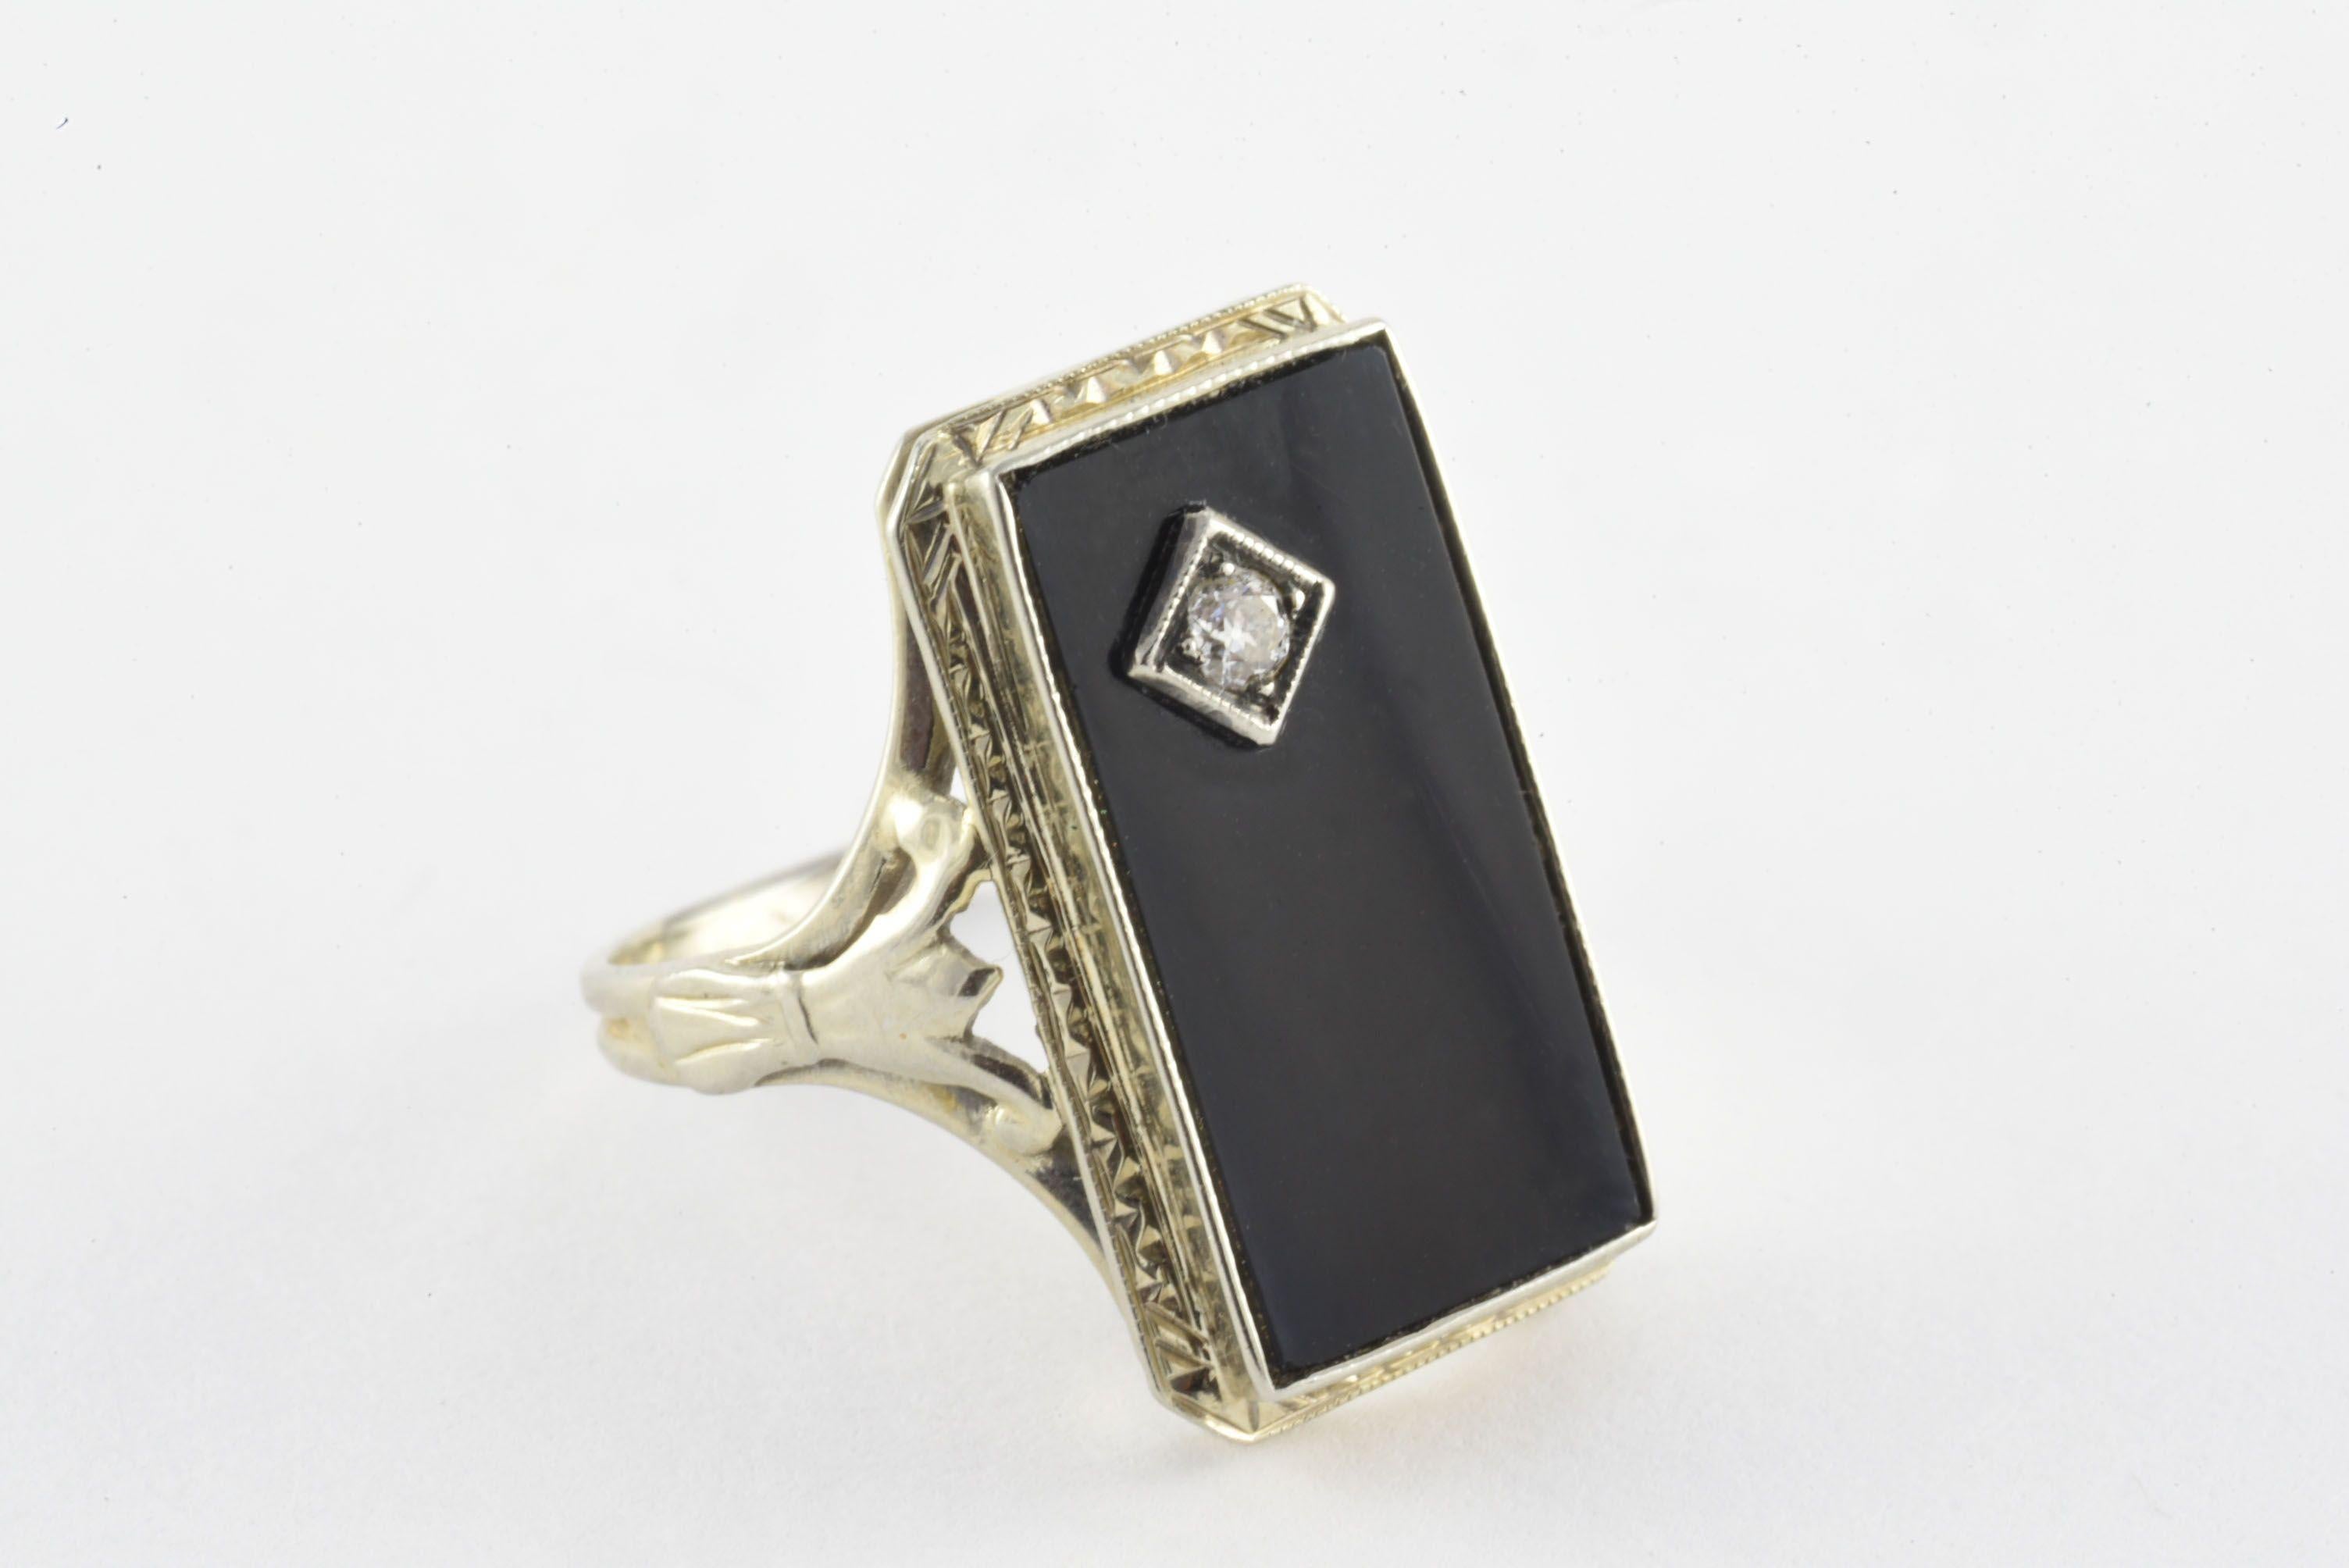 An Old Mine cut diamond weighing 0.10 carats, F-G color, VS clarity sparkles in the corner of a rectangular-shaped onyx plaque measuring 18x10mm and mounted in 18kt white gold.
